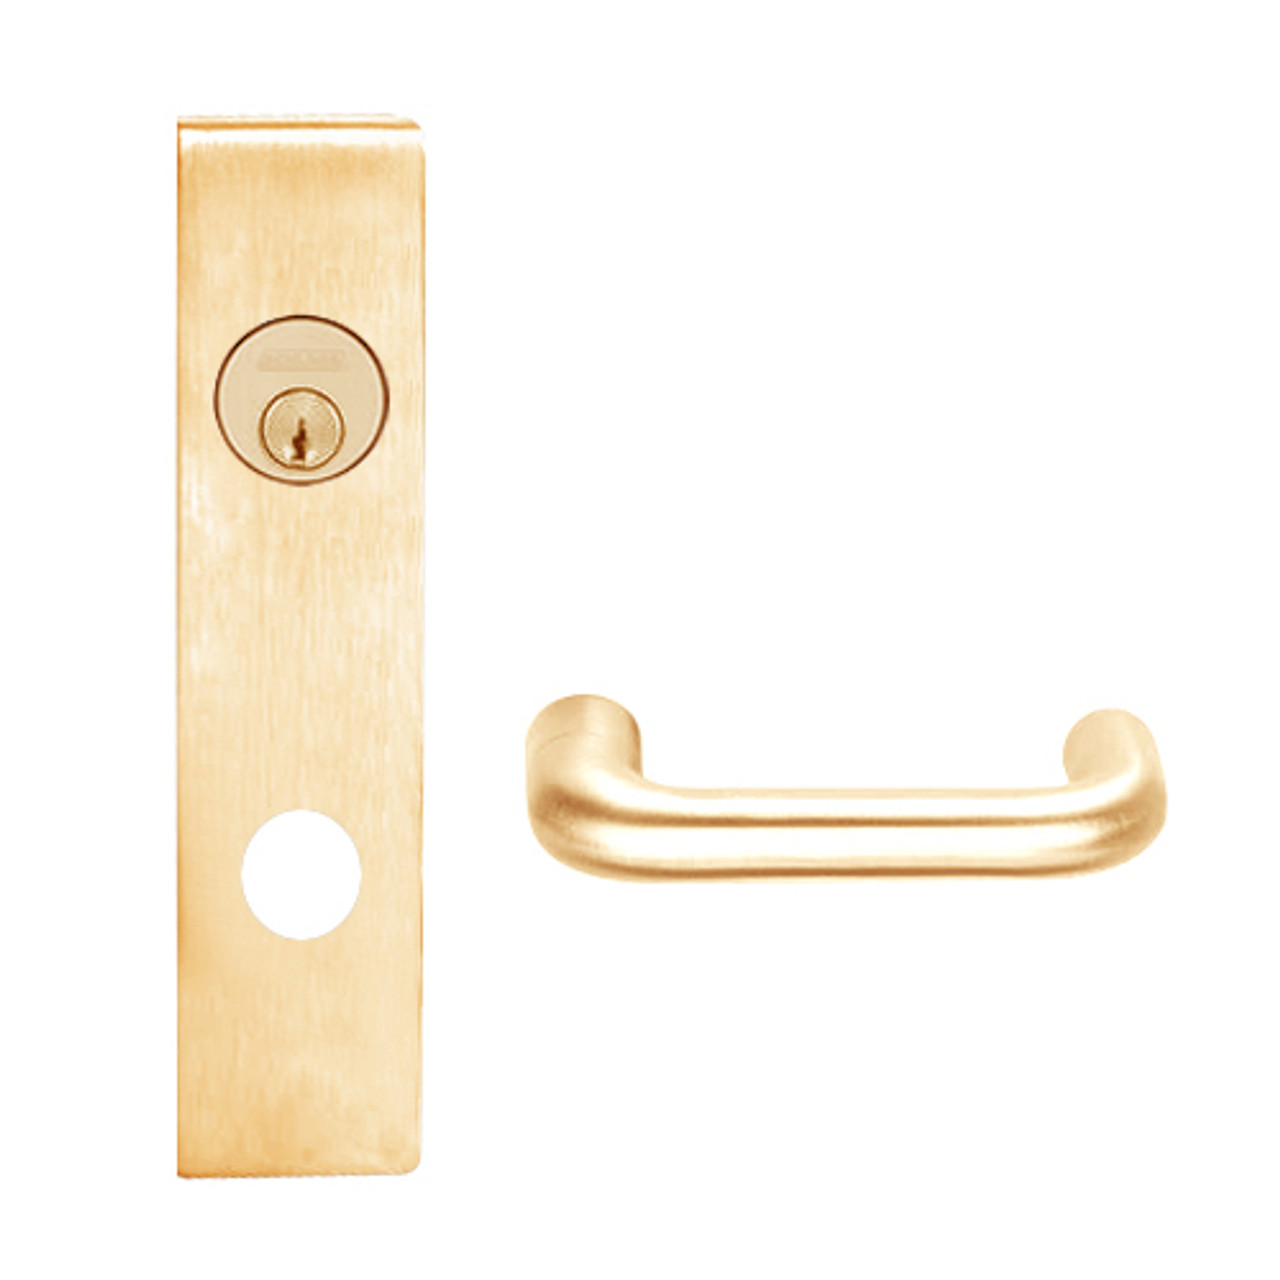 L9456L-03L-612 Schlage L Series Less Cylinder Corridor with Deadbolt Commercial Mortise Lock with 03 Cast Lever Design in Satin Bronze